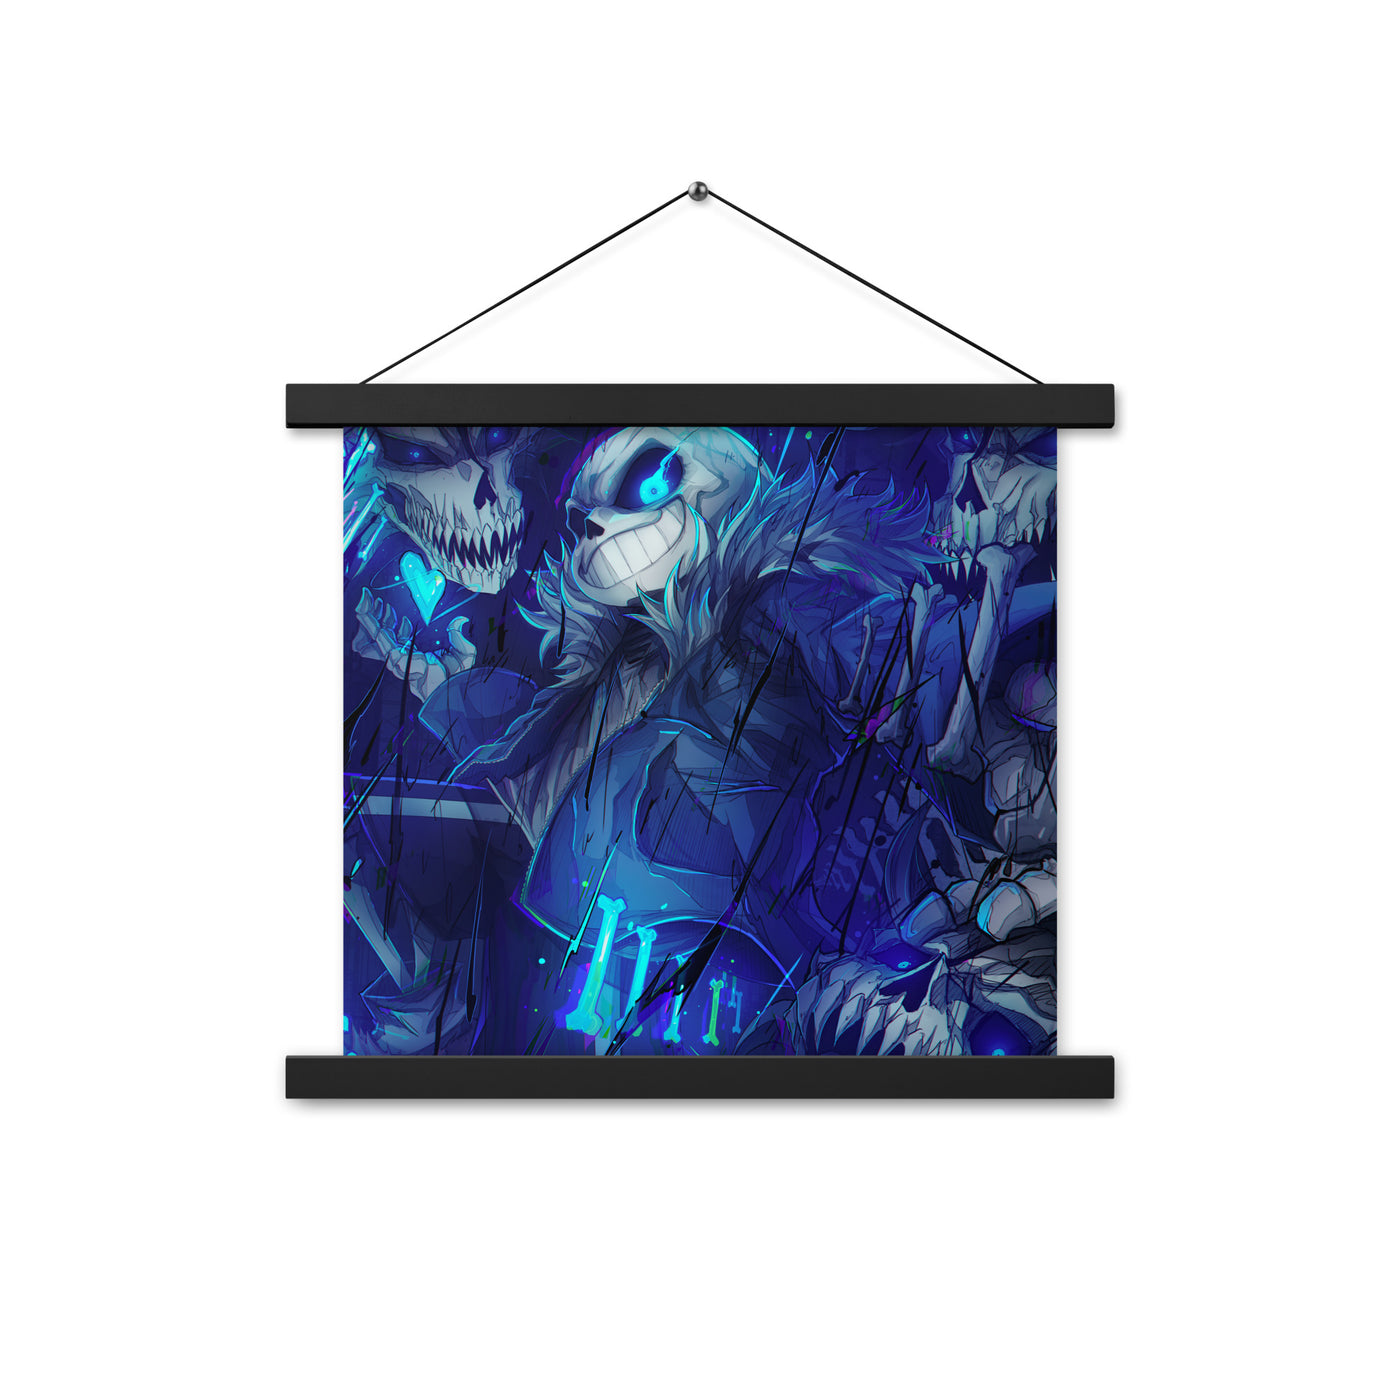 Sans From Undertale Poster with hangers